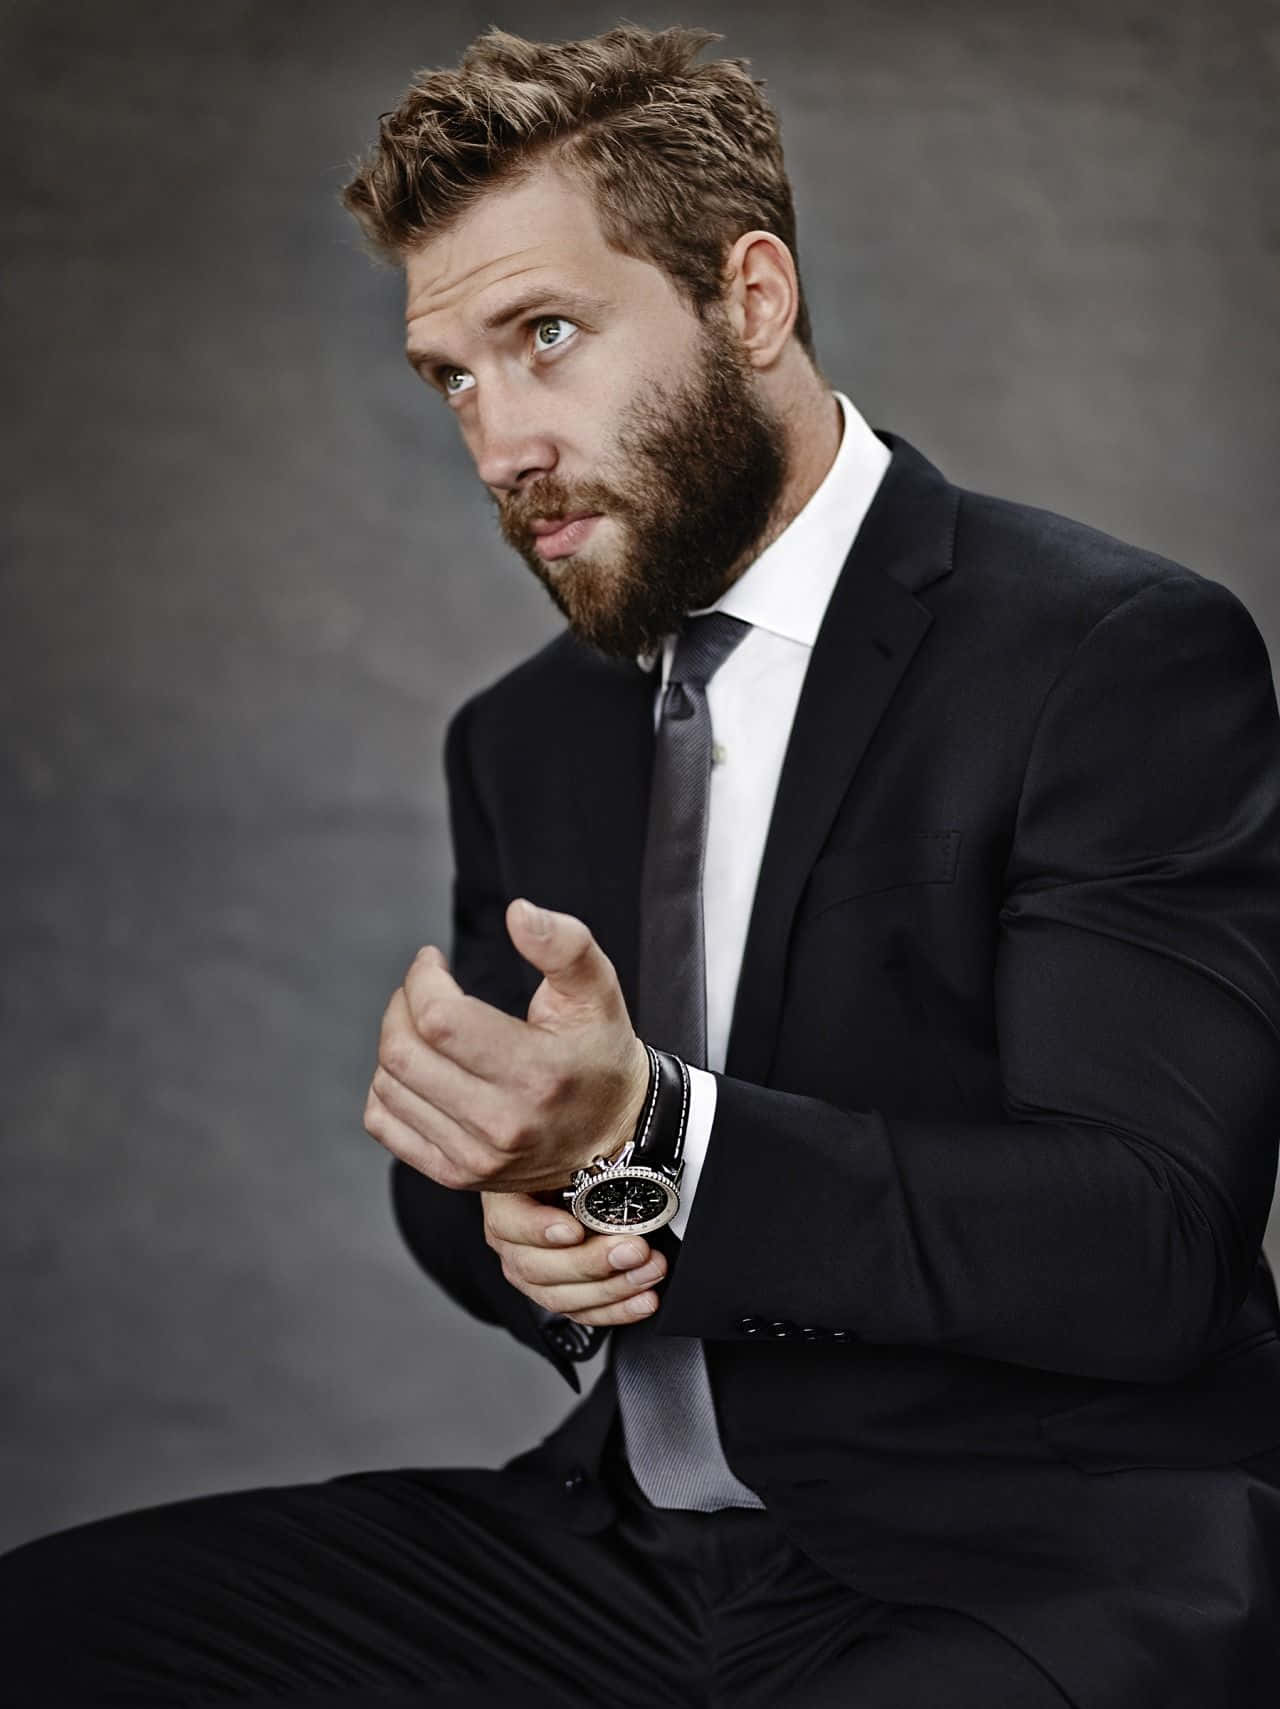 Bearded Manin Suitwith Watch Wallpaper